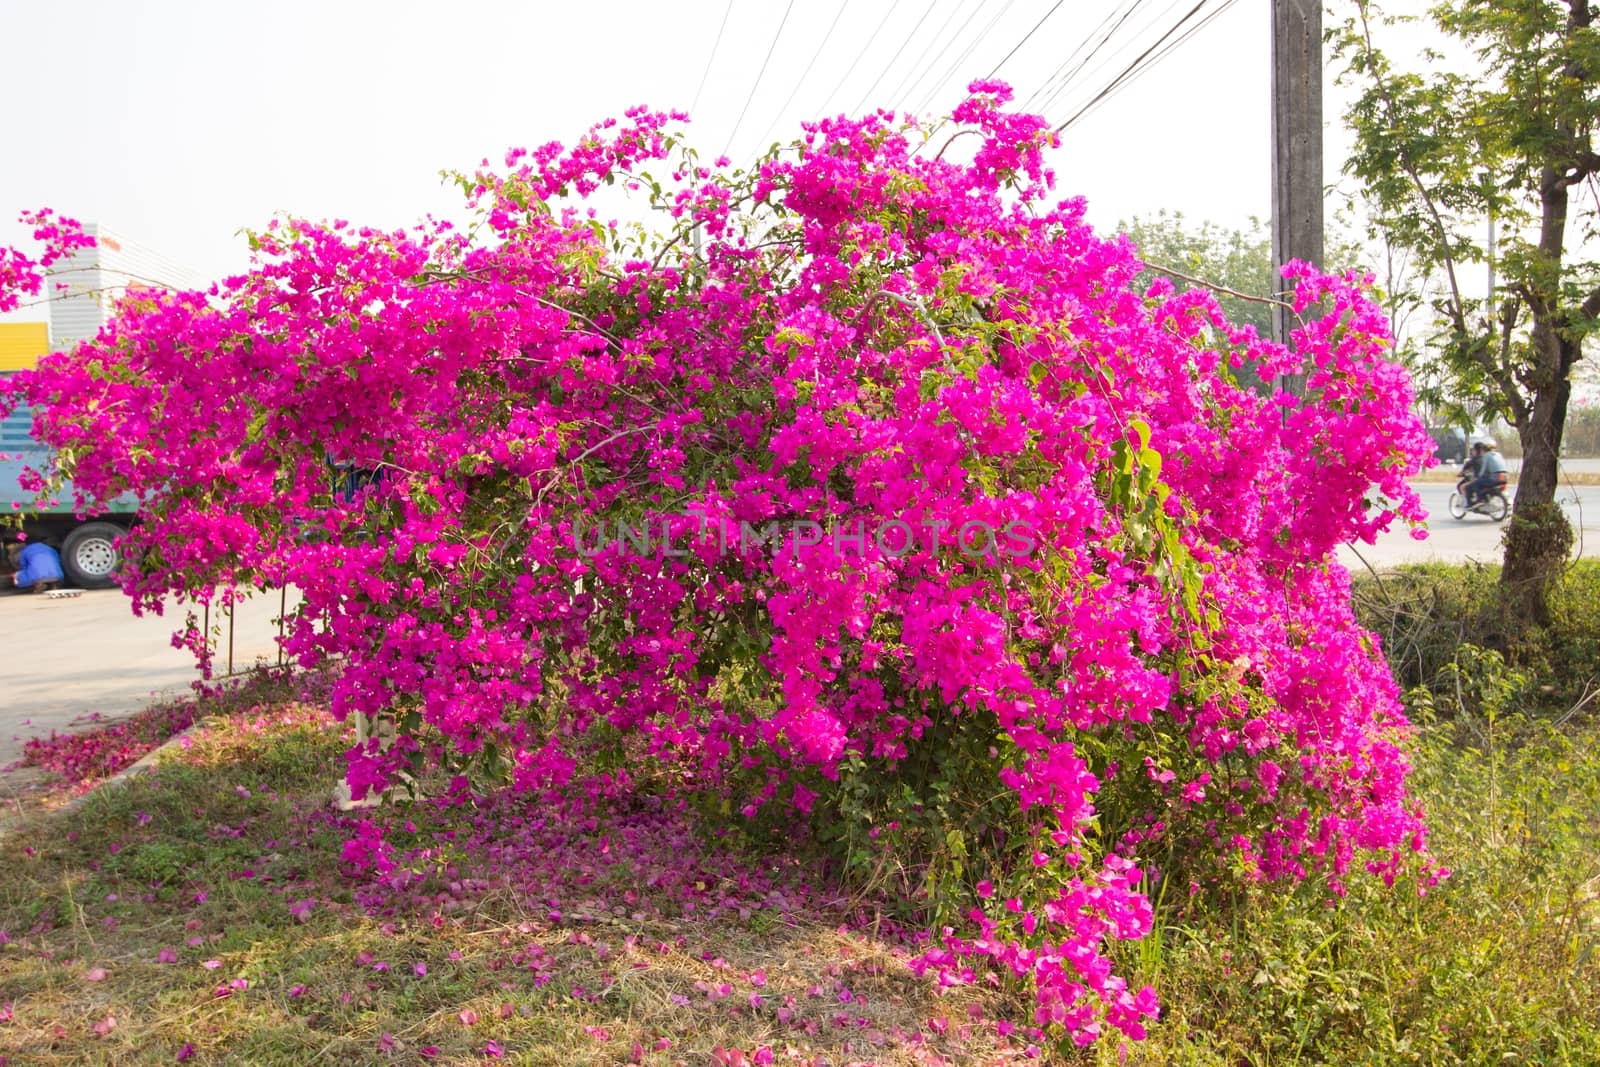 A Pink Bougainvillea Tree located by the road by a3701027